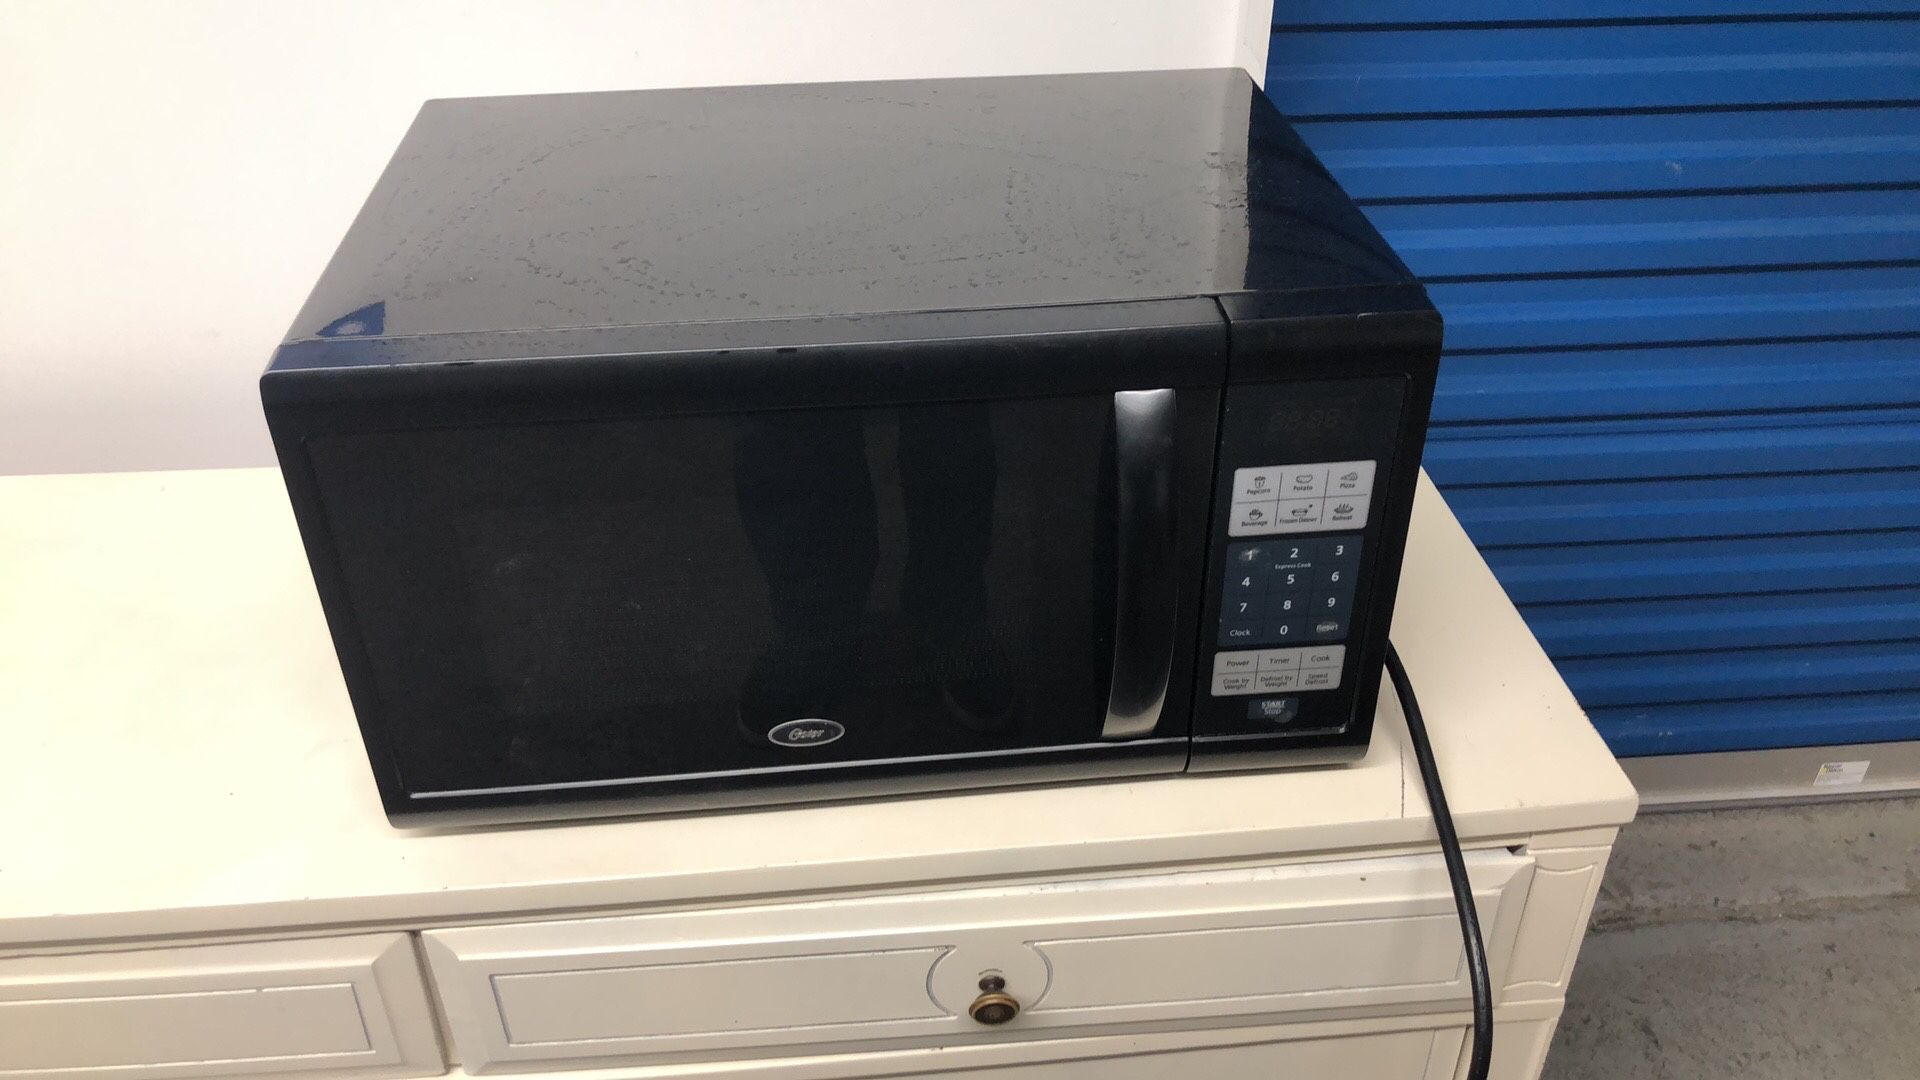 Oster 1100 W Good condition work great microwave